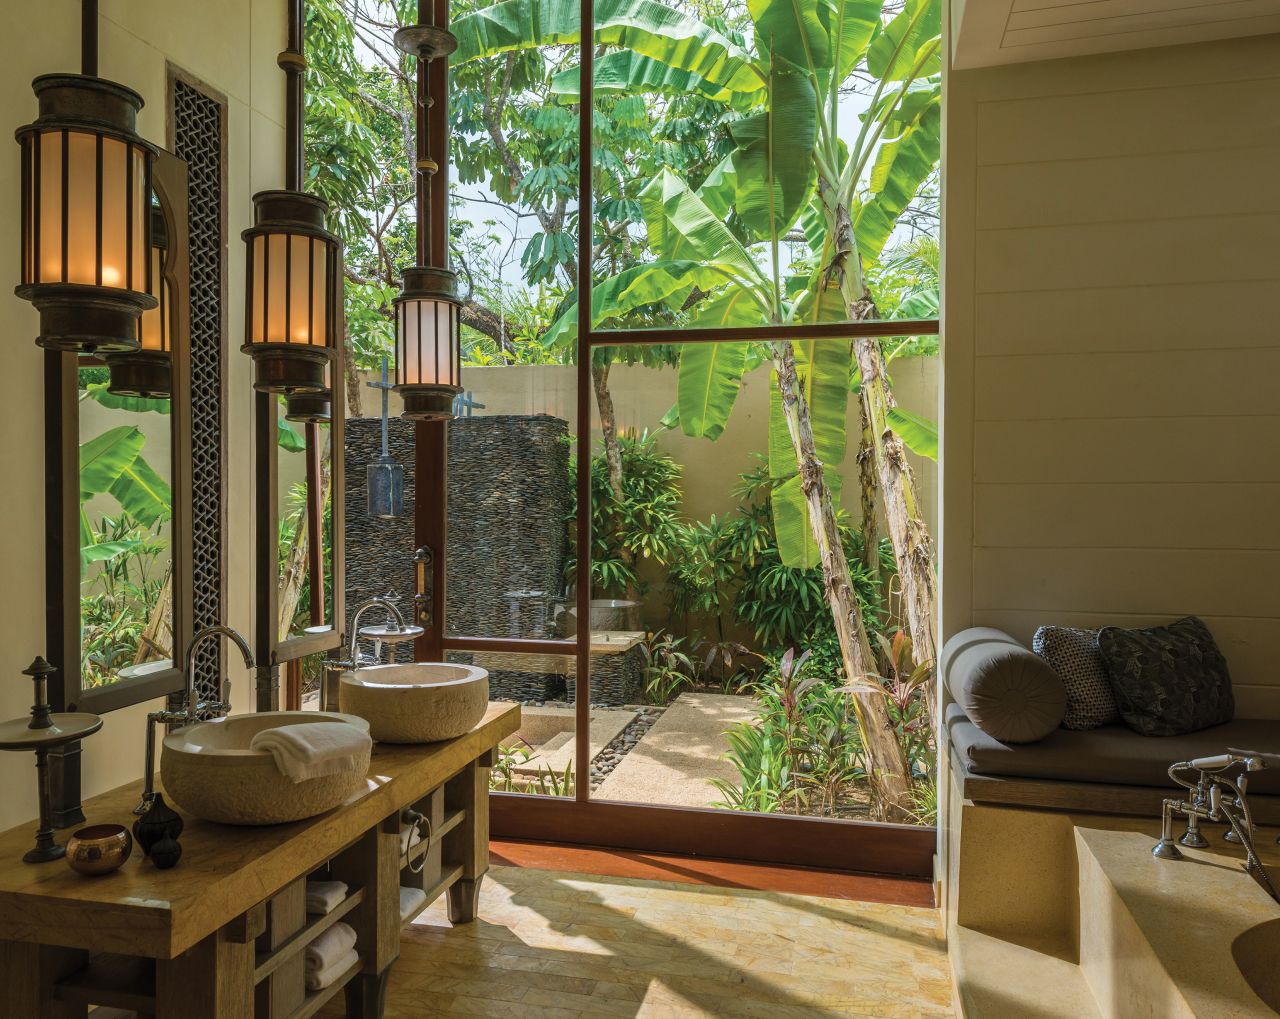 The guest bathrooms of the Four Seasons Resort Langkawi in Malaysia feature soaring arches, bright skylights and outdoor soaking tubs in private gardens.